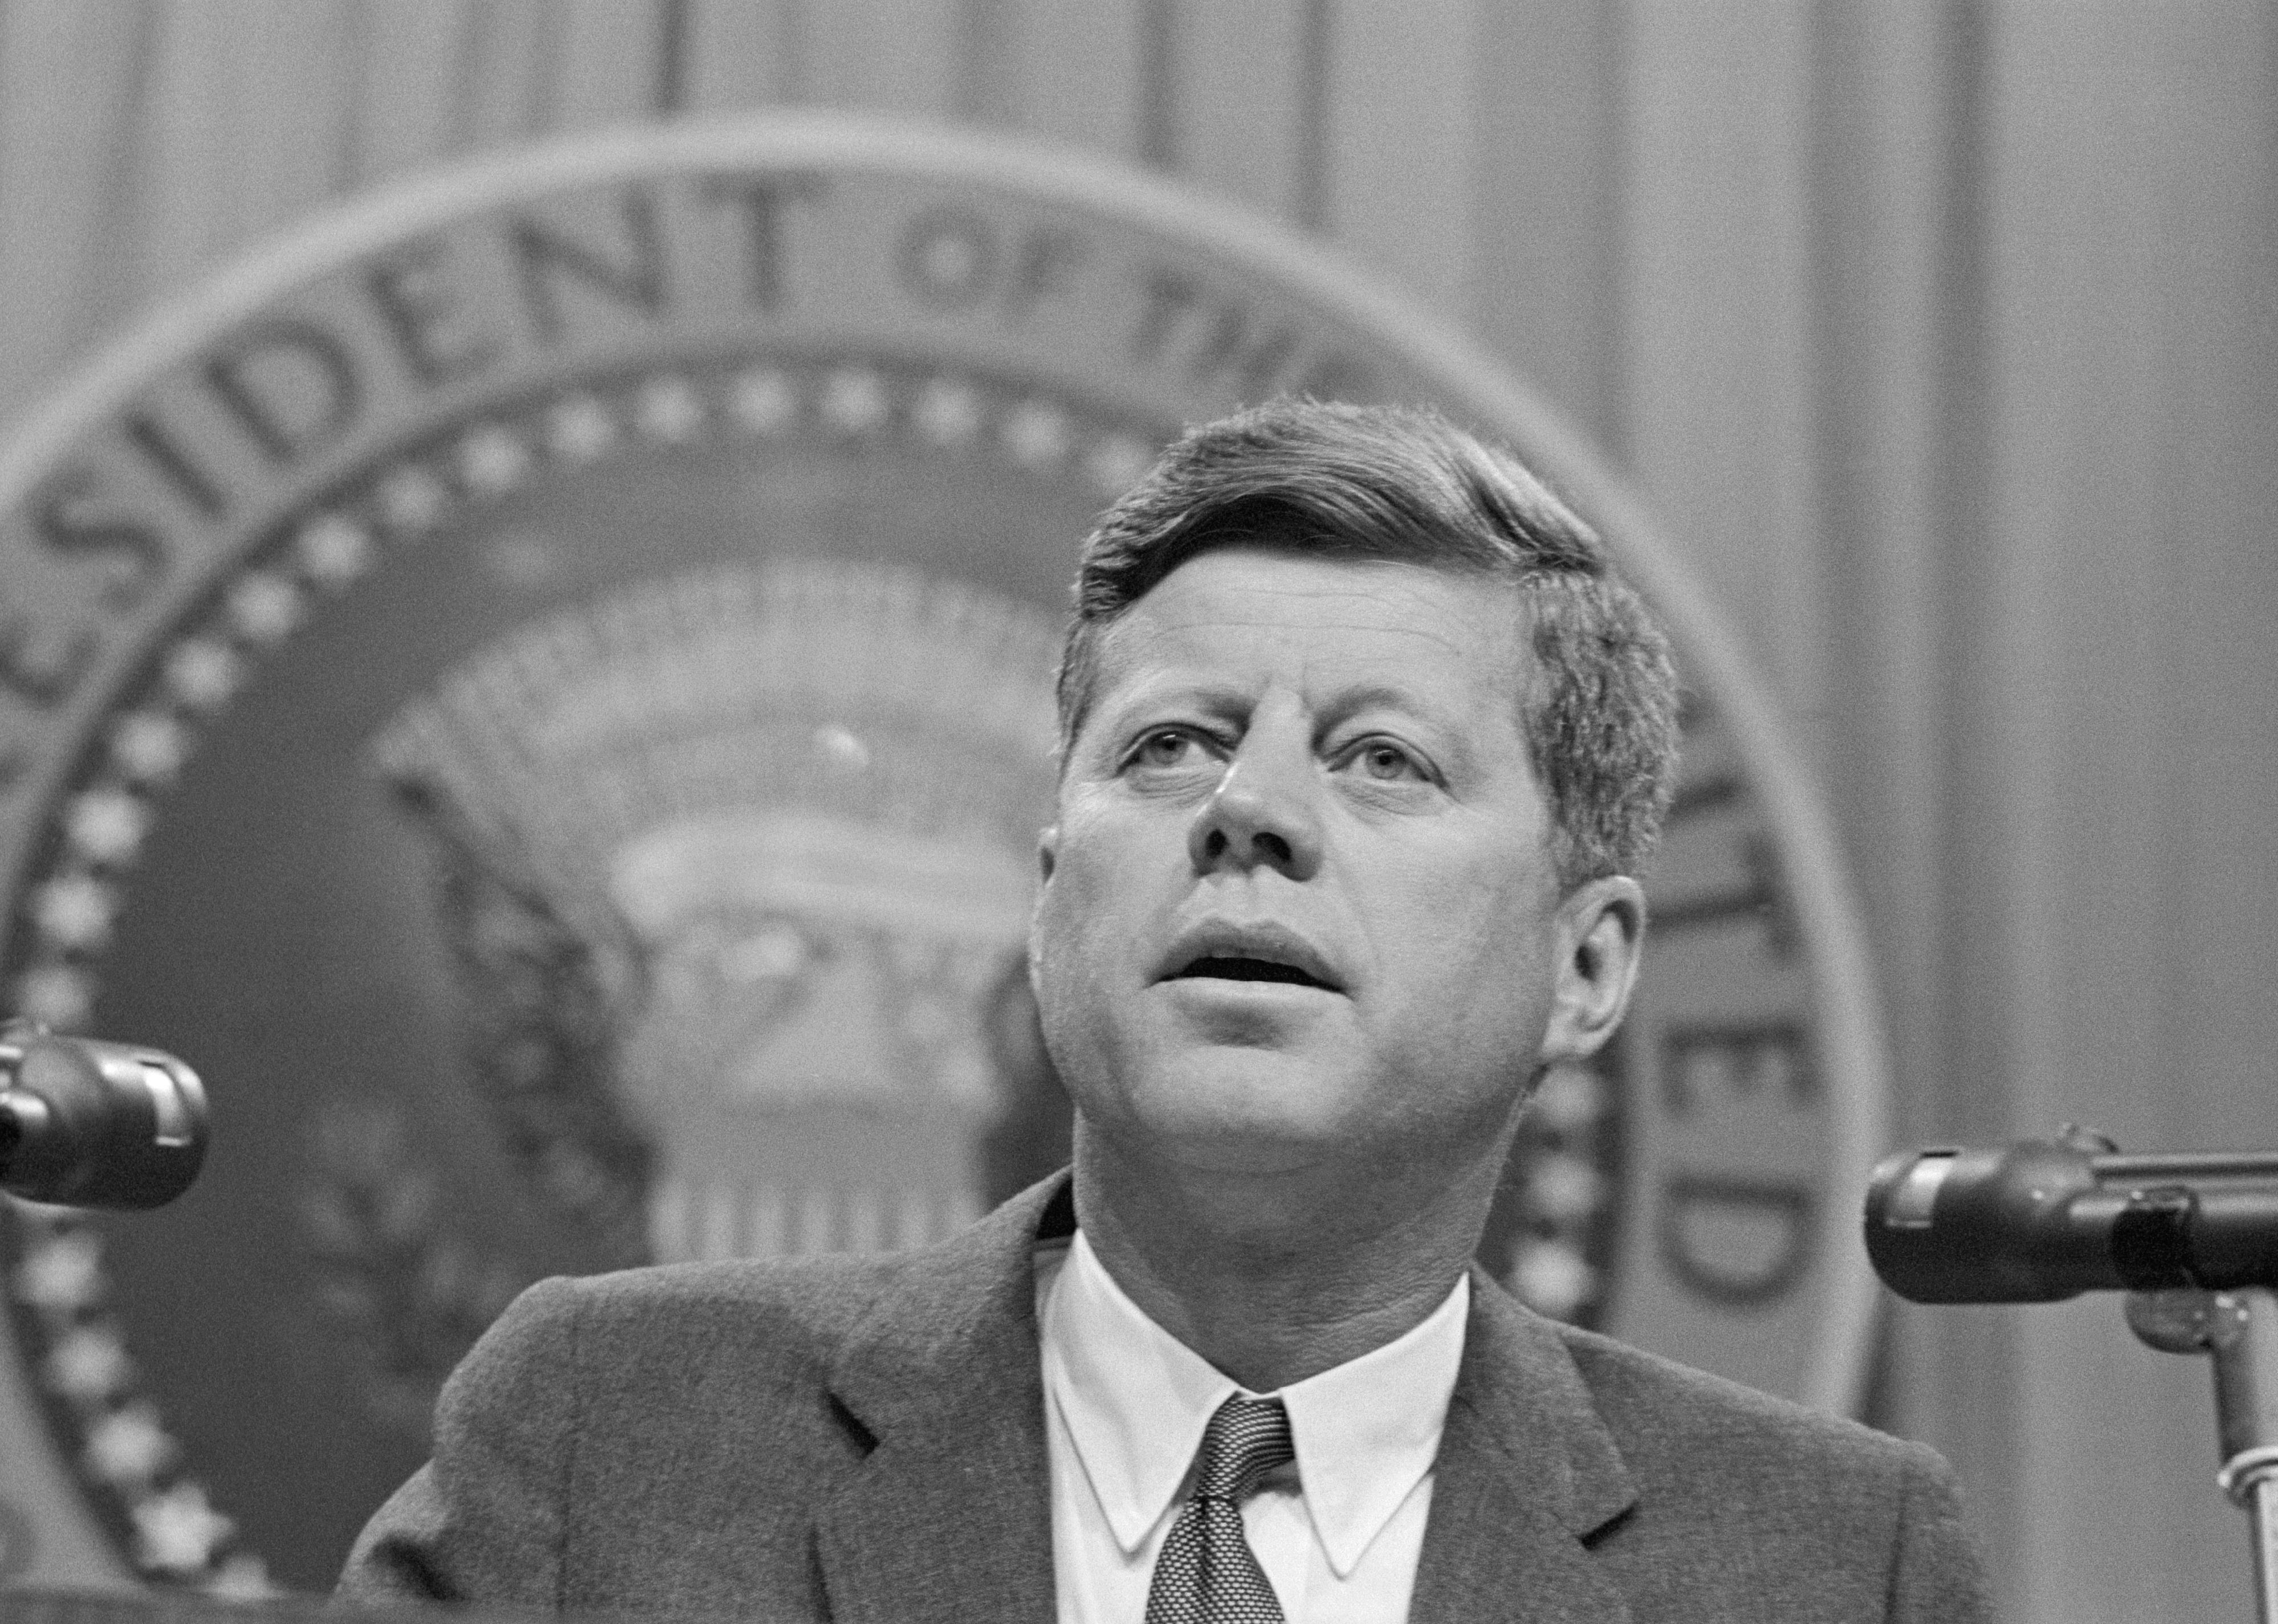 John F. Kennedy speaking in front of the presidential seal.